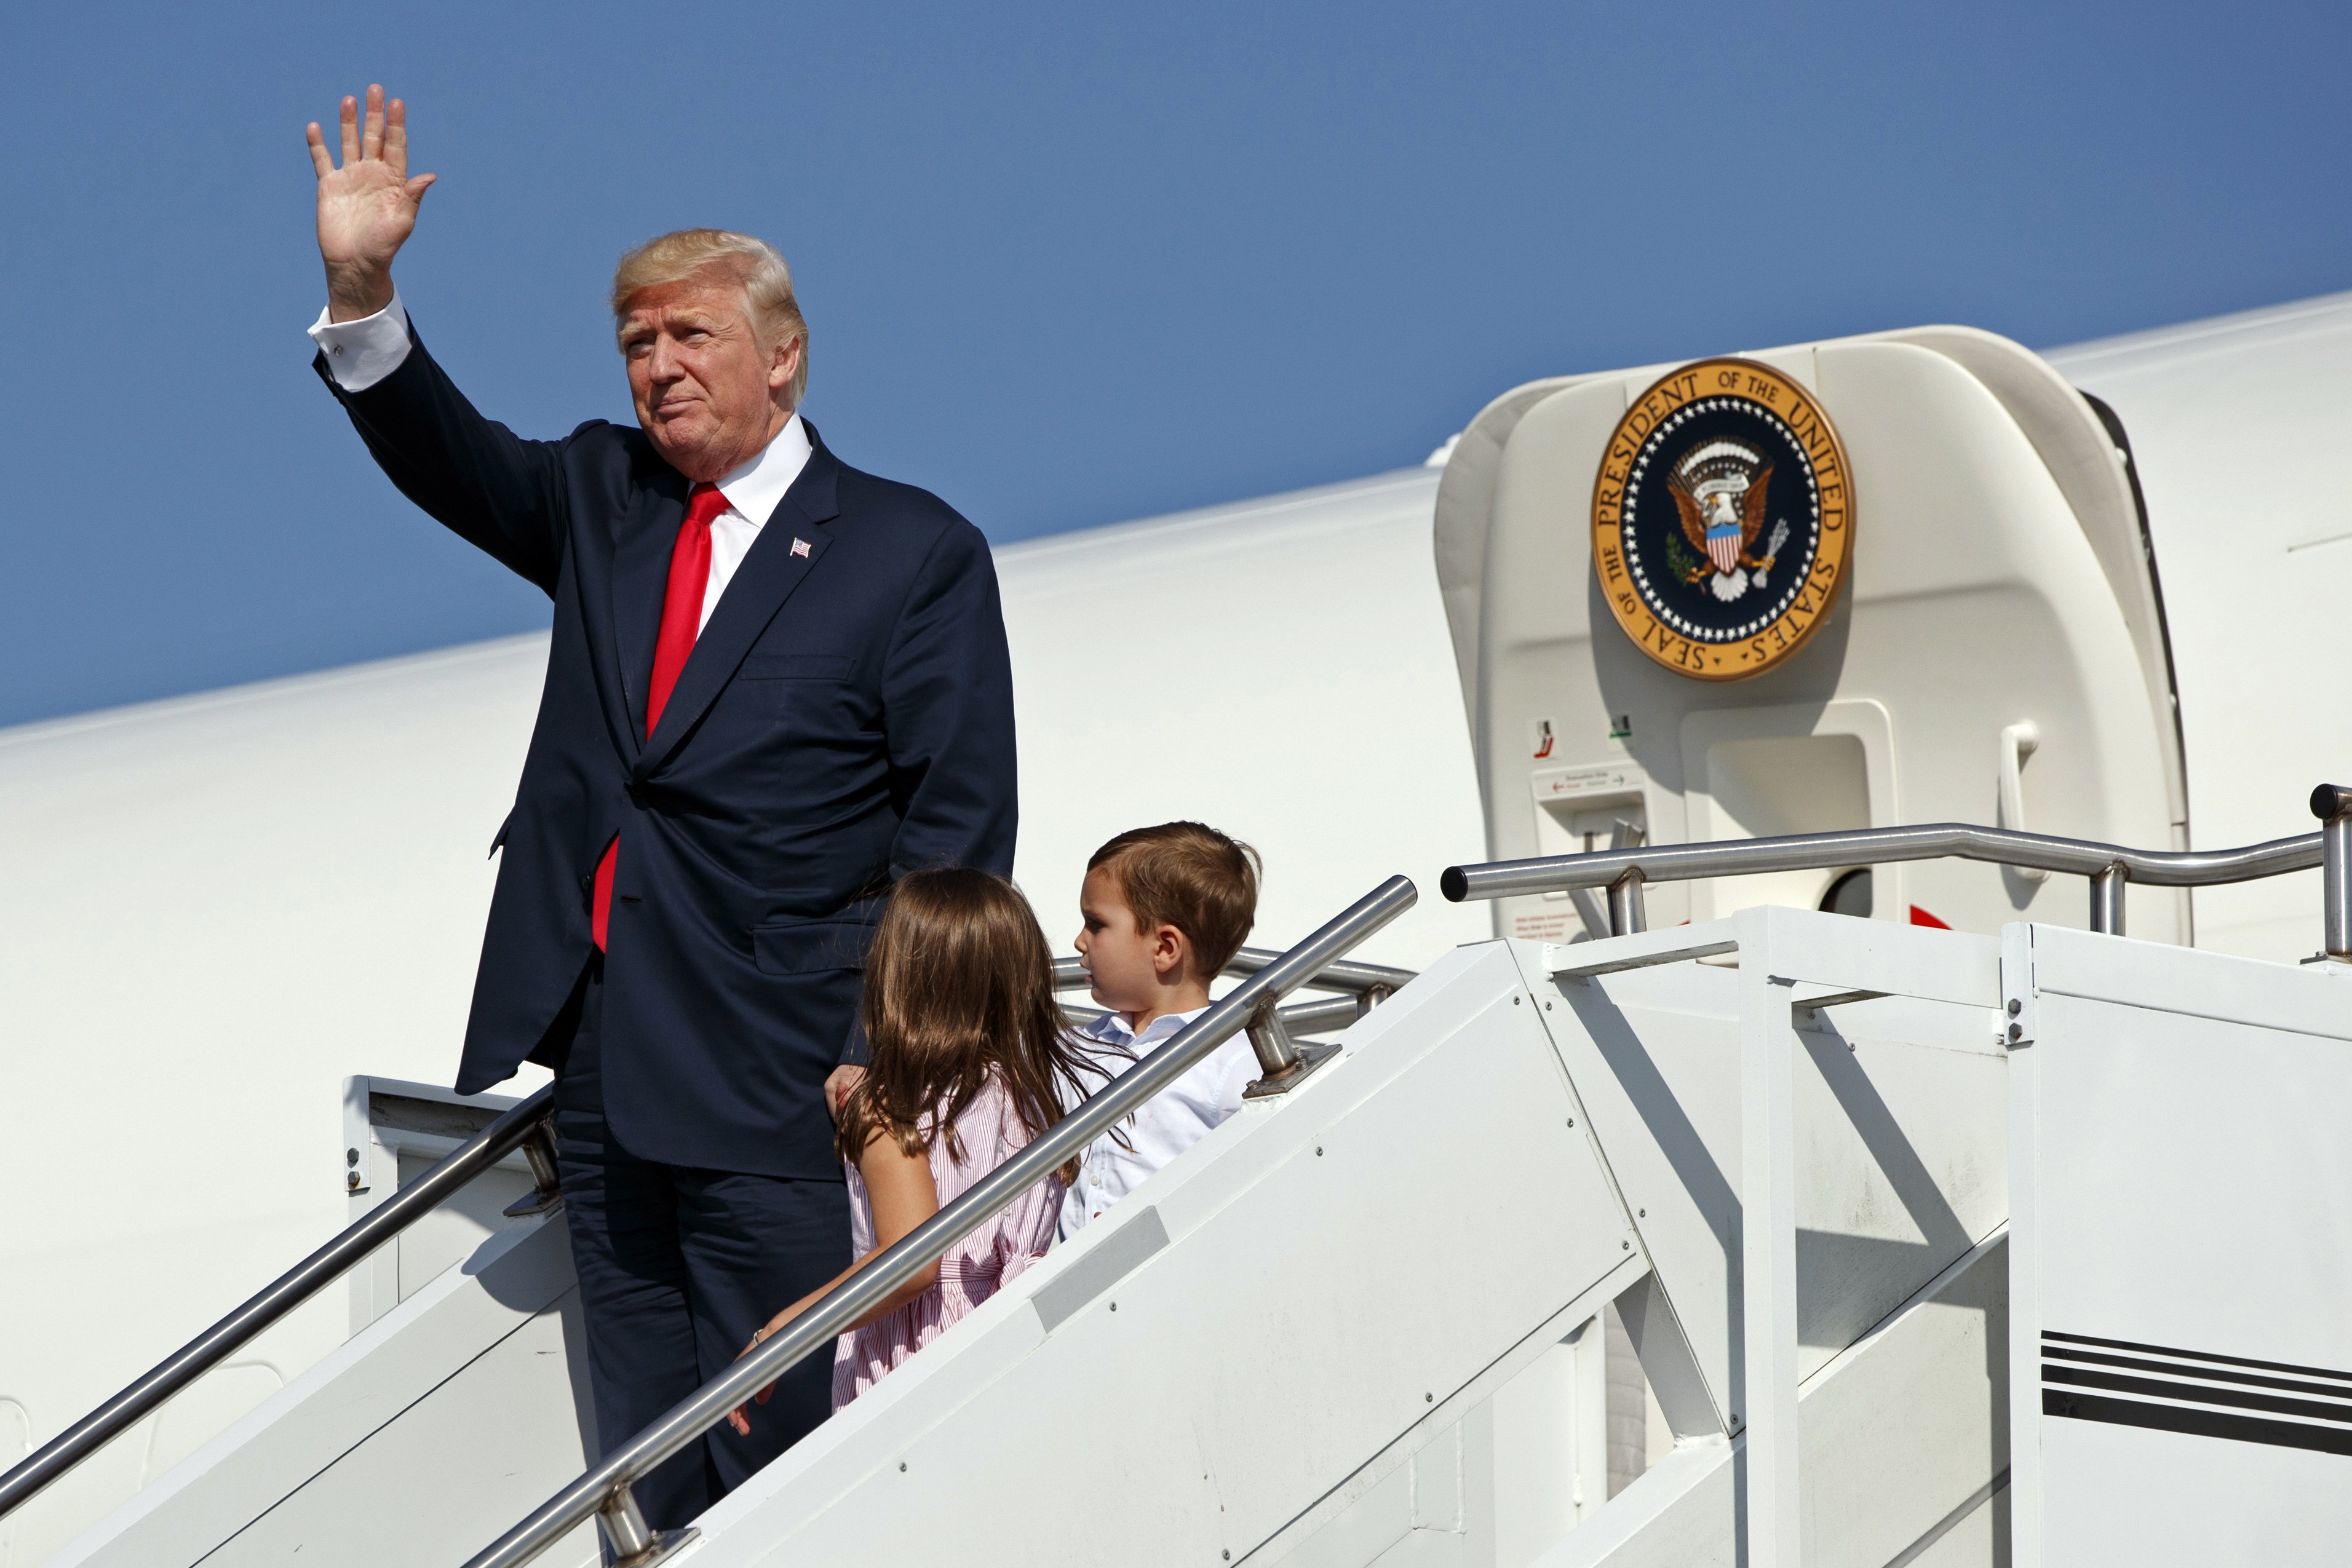 President Donald Trump waves as he walks down the steps of Air Force One with his grandchildren after arriving at Morristown Municipal Airport to begin his summer vacation at his Bedminster golf club in Morristown, N.J. on Aug. 4, 2017. (Evan Vucci—AP)